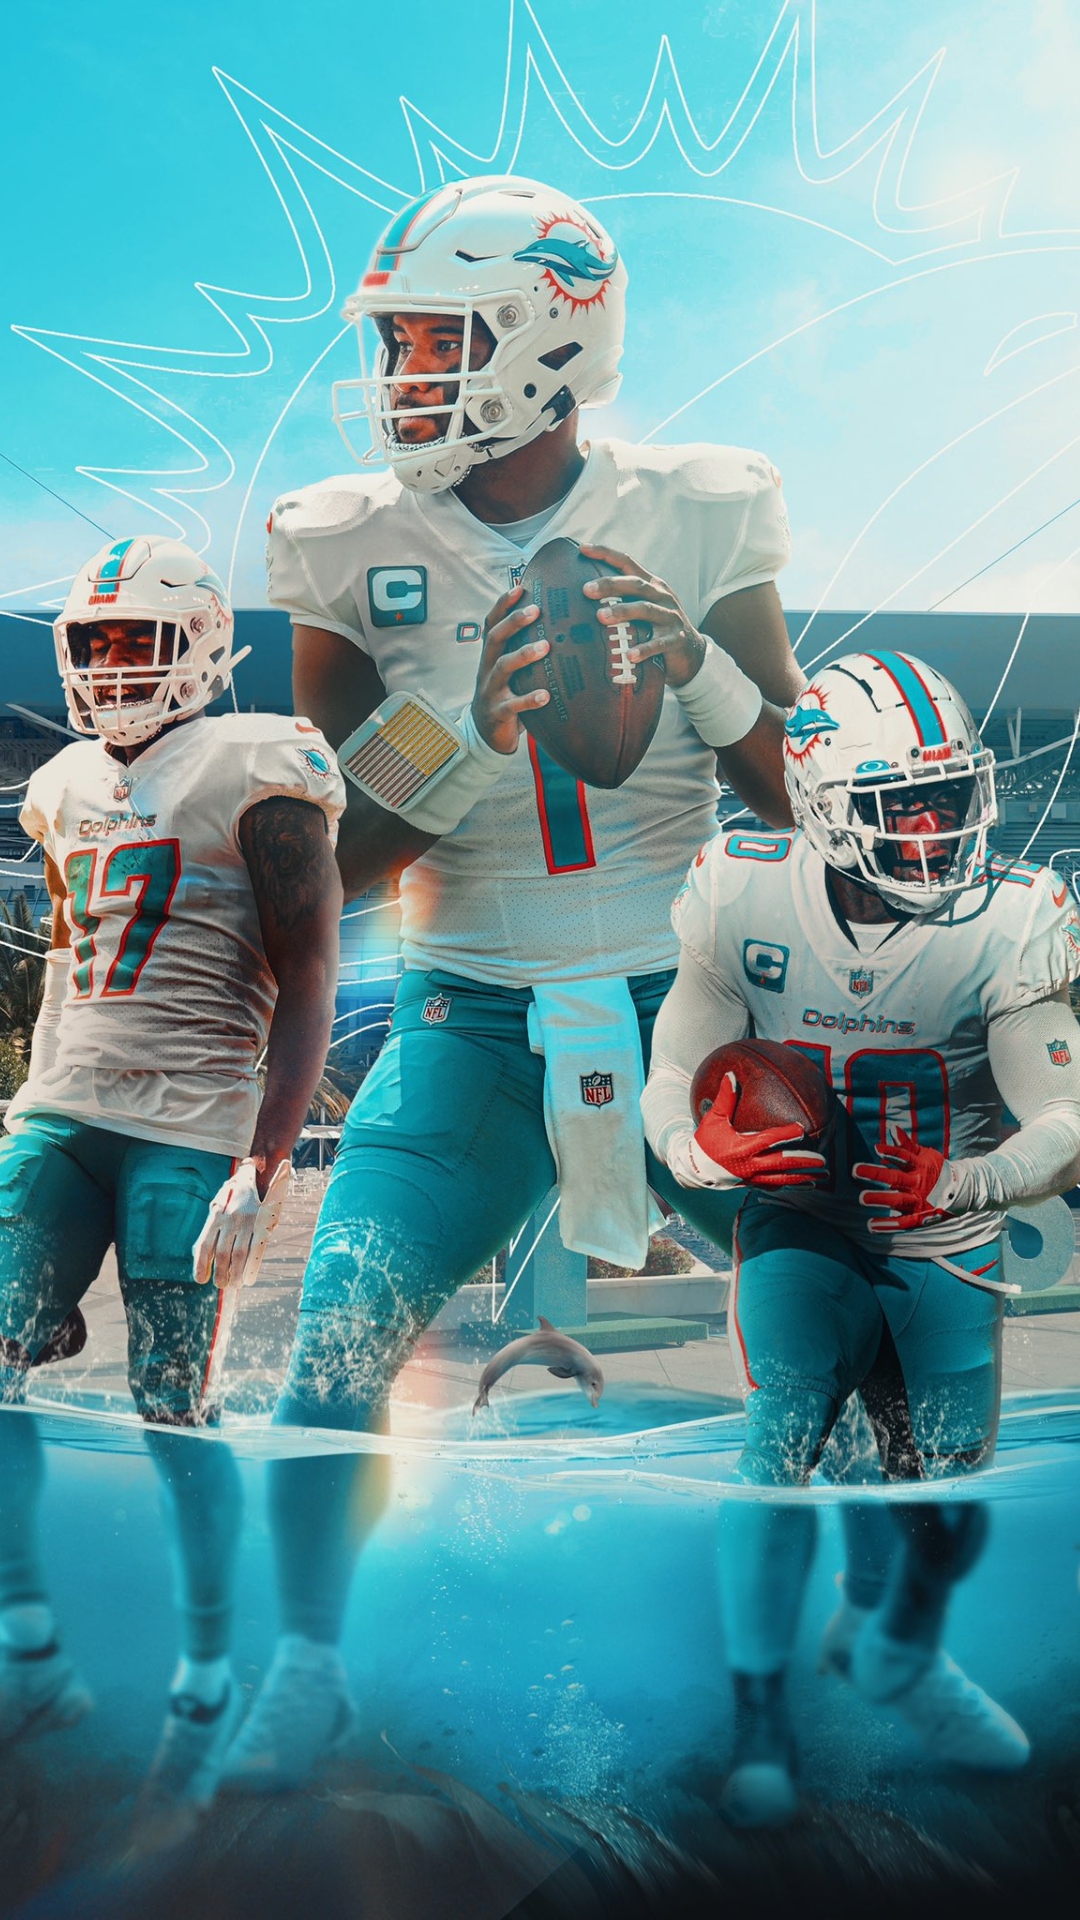 Wallpapers Miami Wallpapers